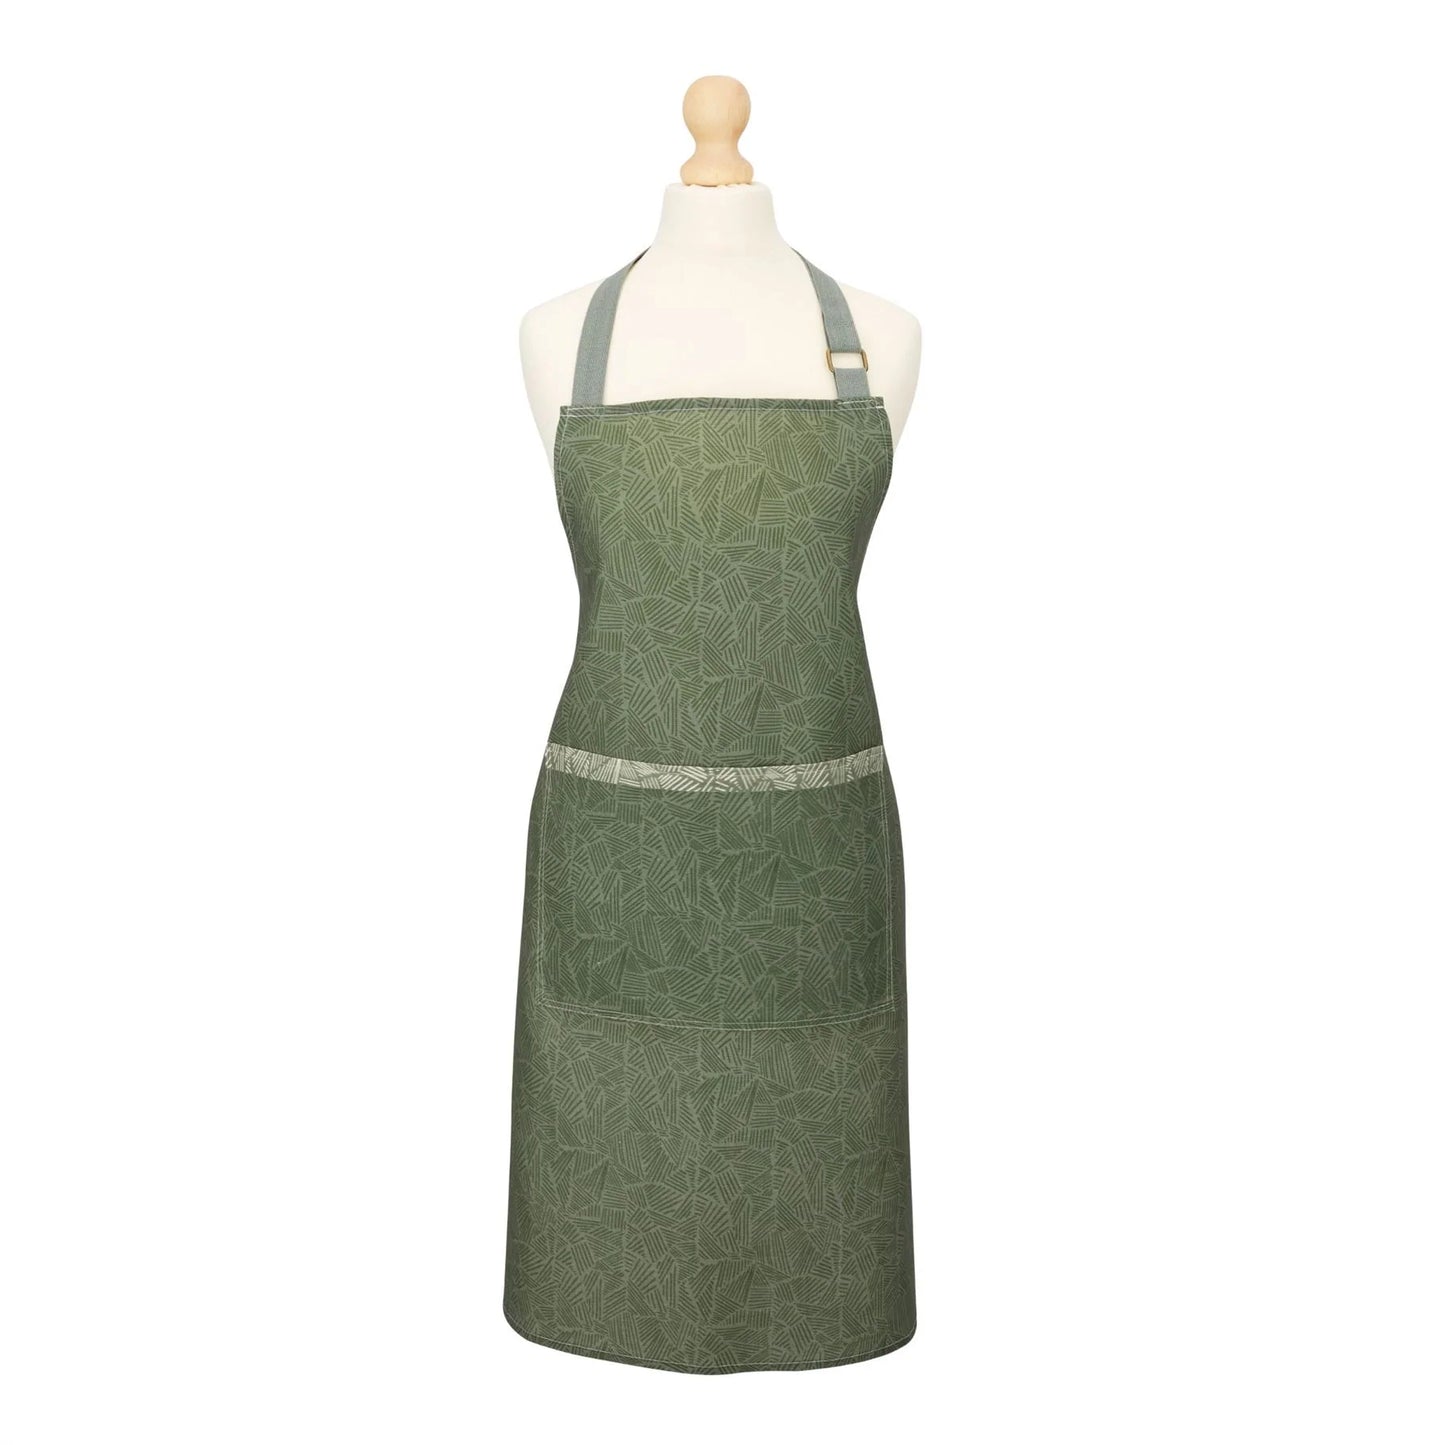 Apron Recycled Cotton Sperrin BBQ